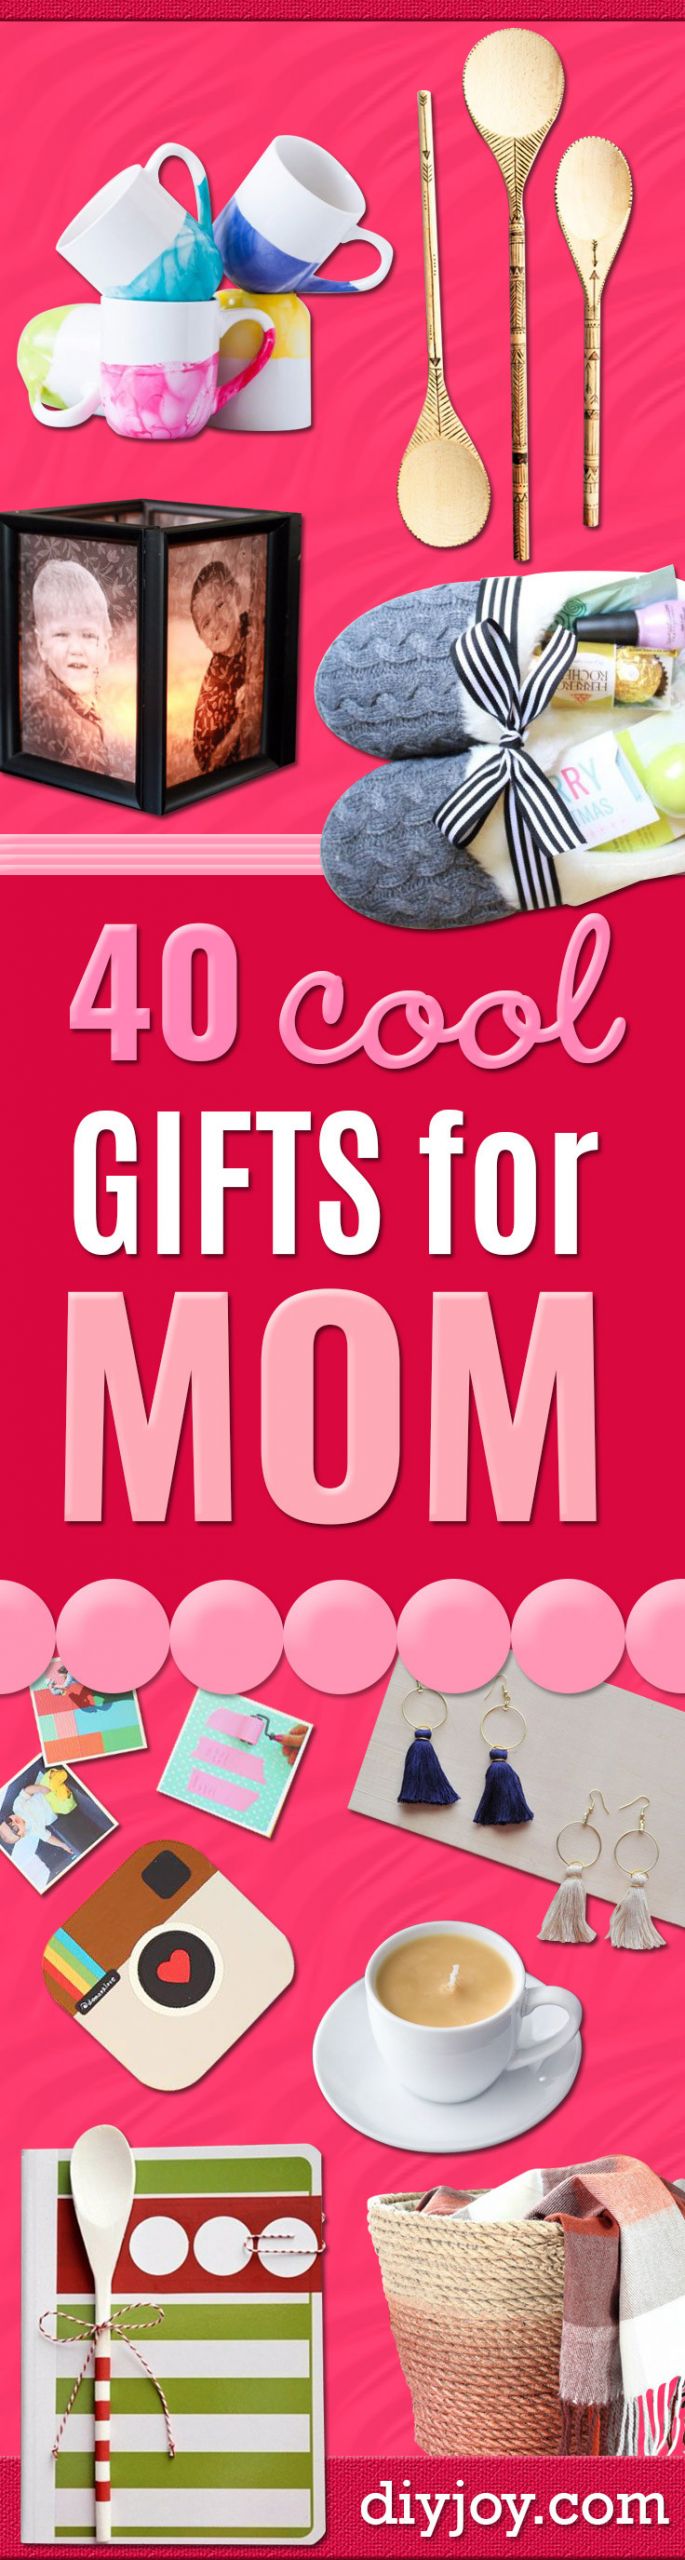 Cool DIY Christmas Gifts
 40 Coolest Gifts To Make for Mom